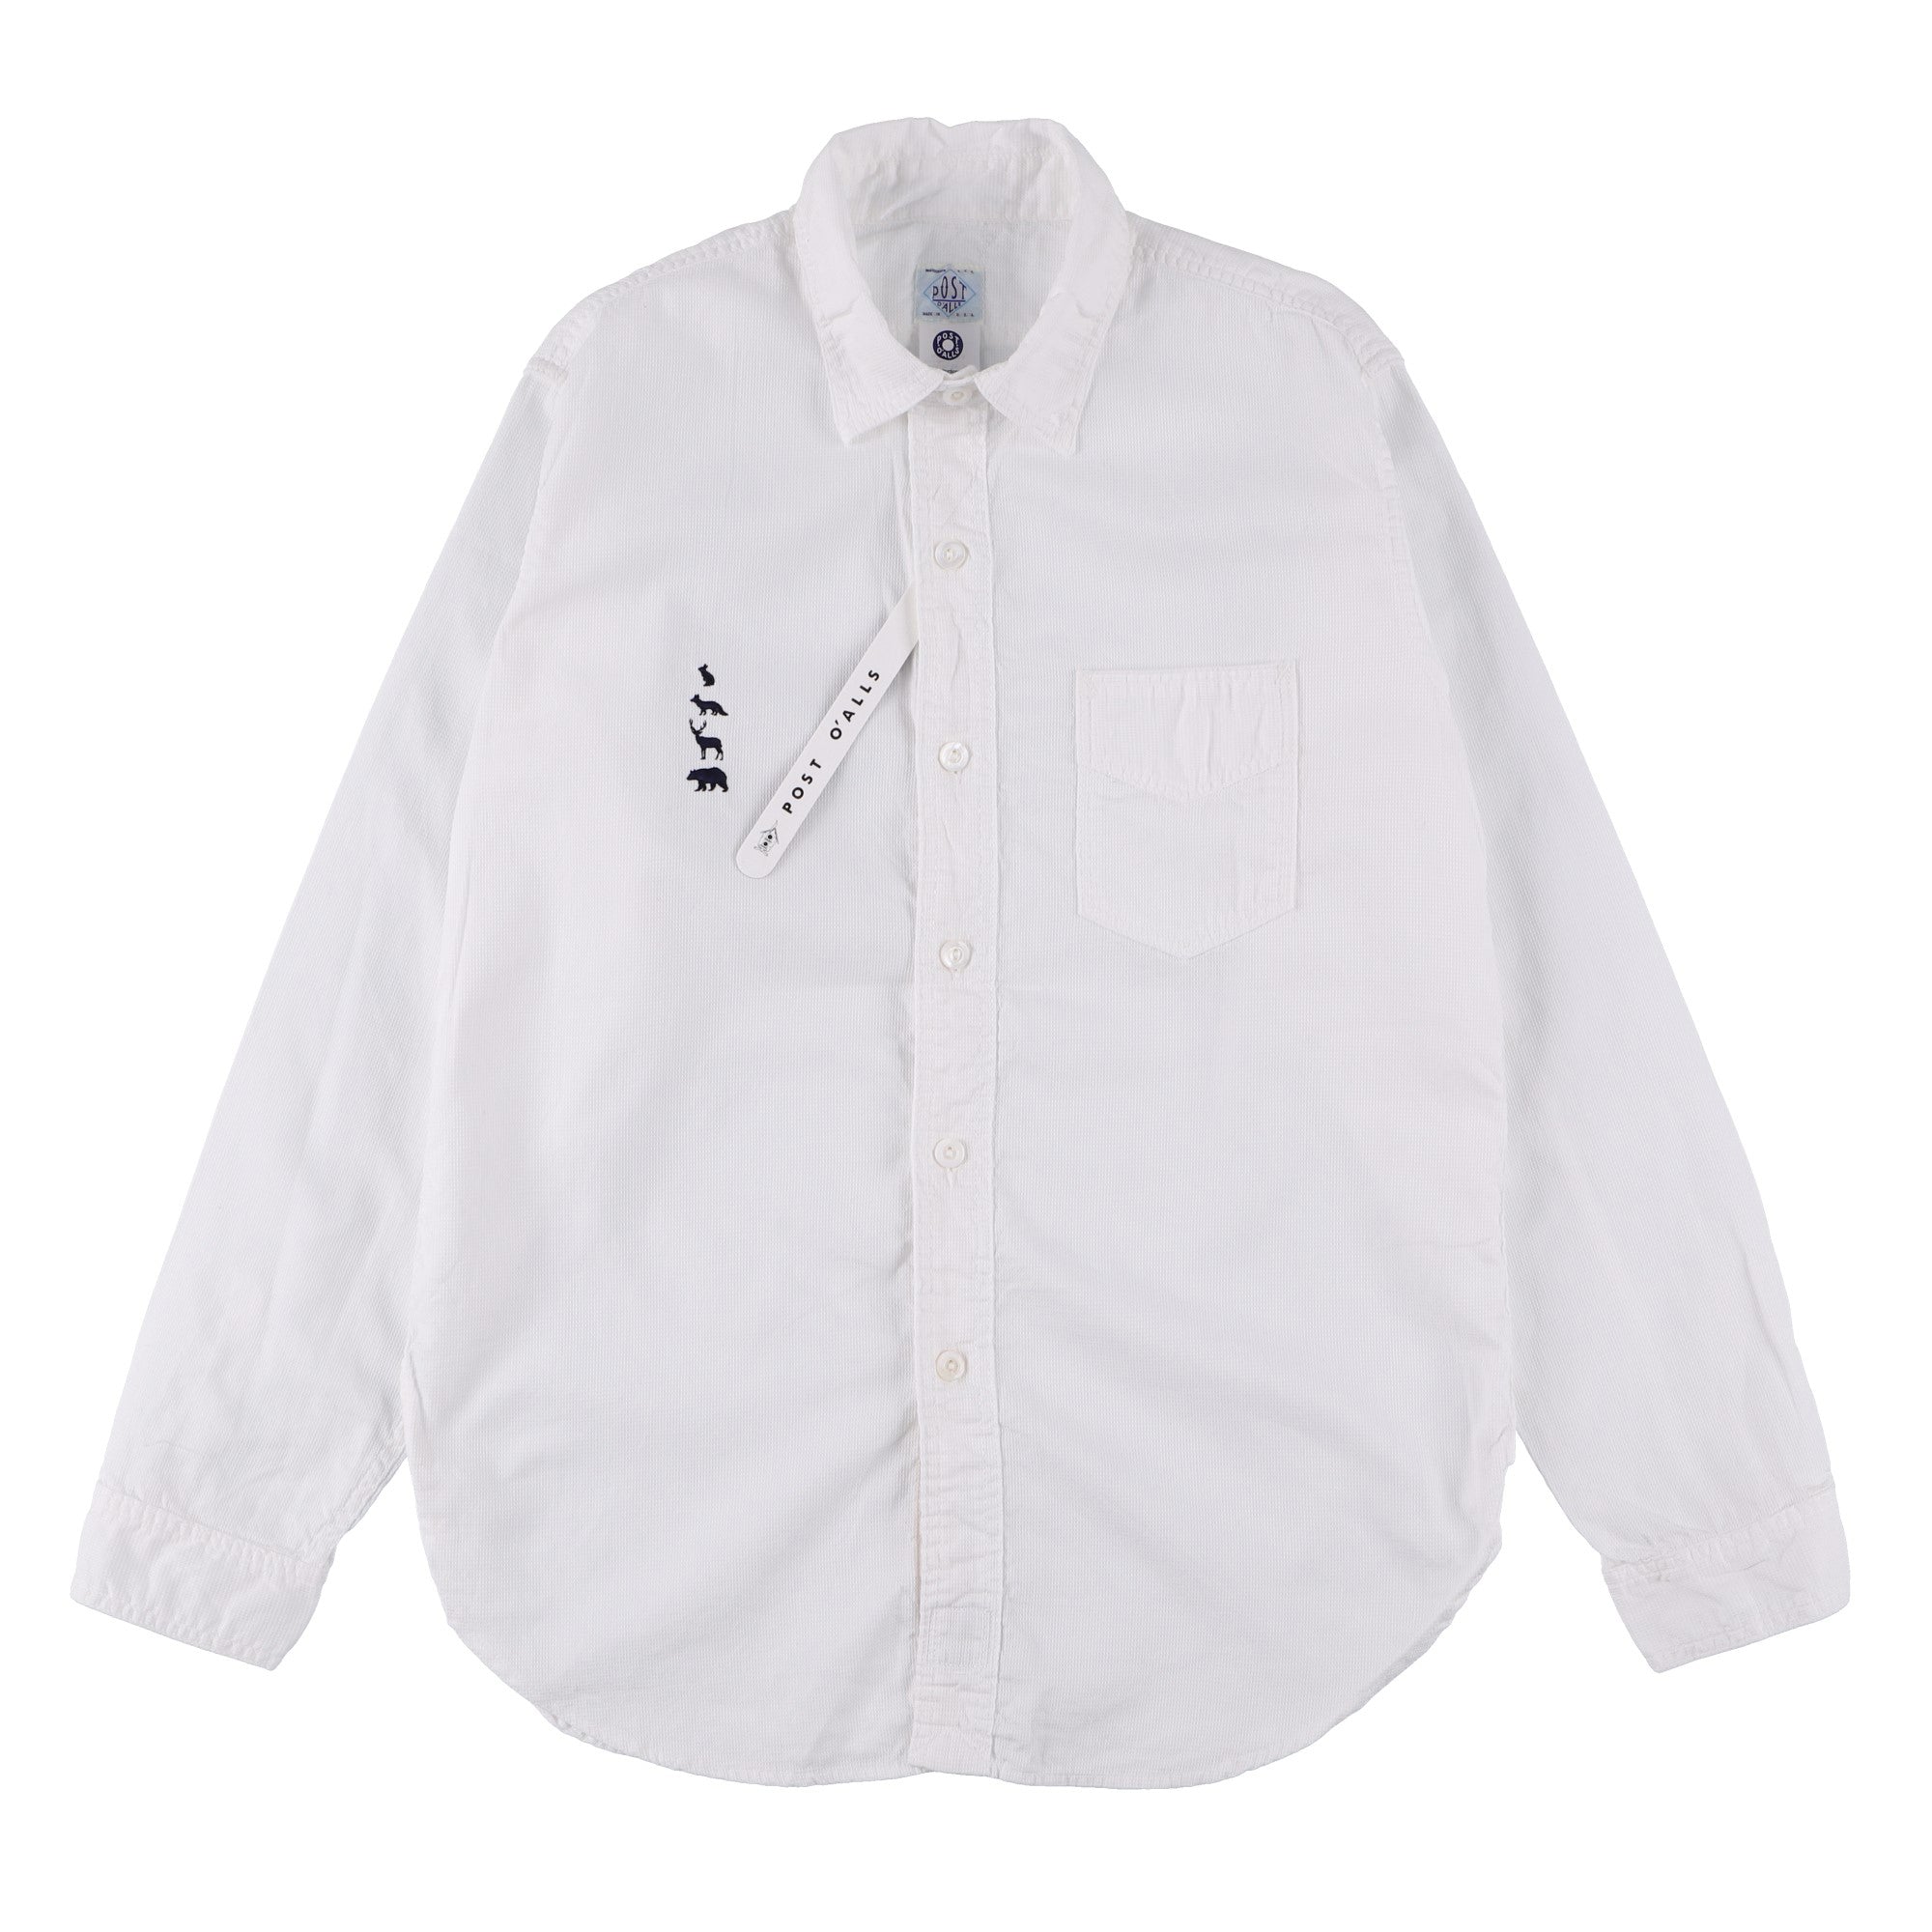 Post O'Alls x Mountain Research animal embroidery shirt : white cotton